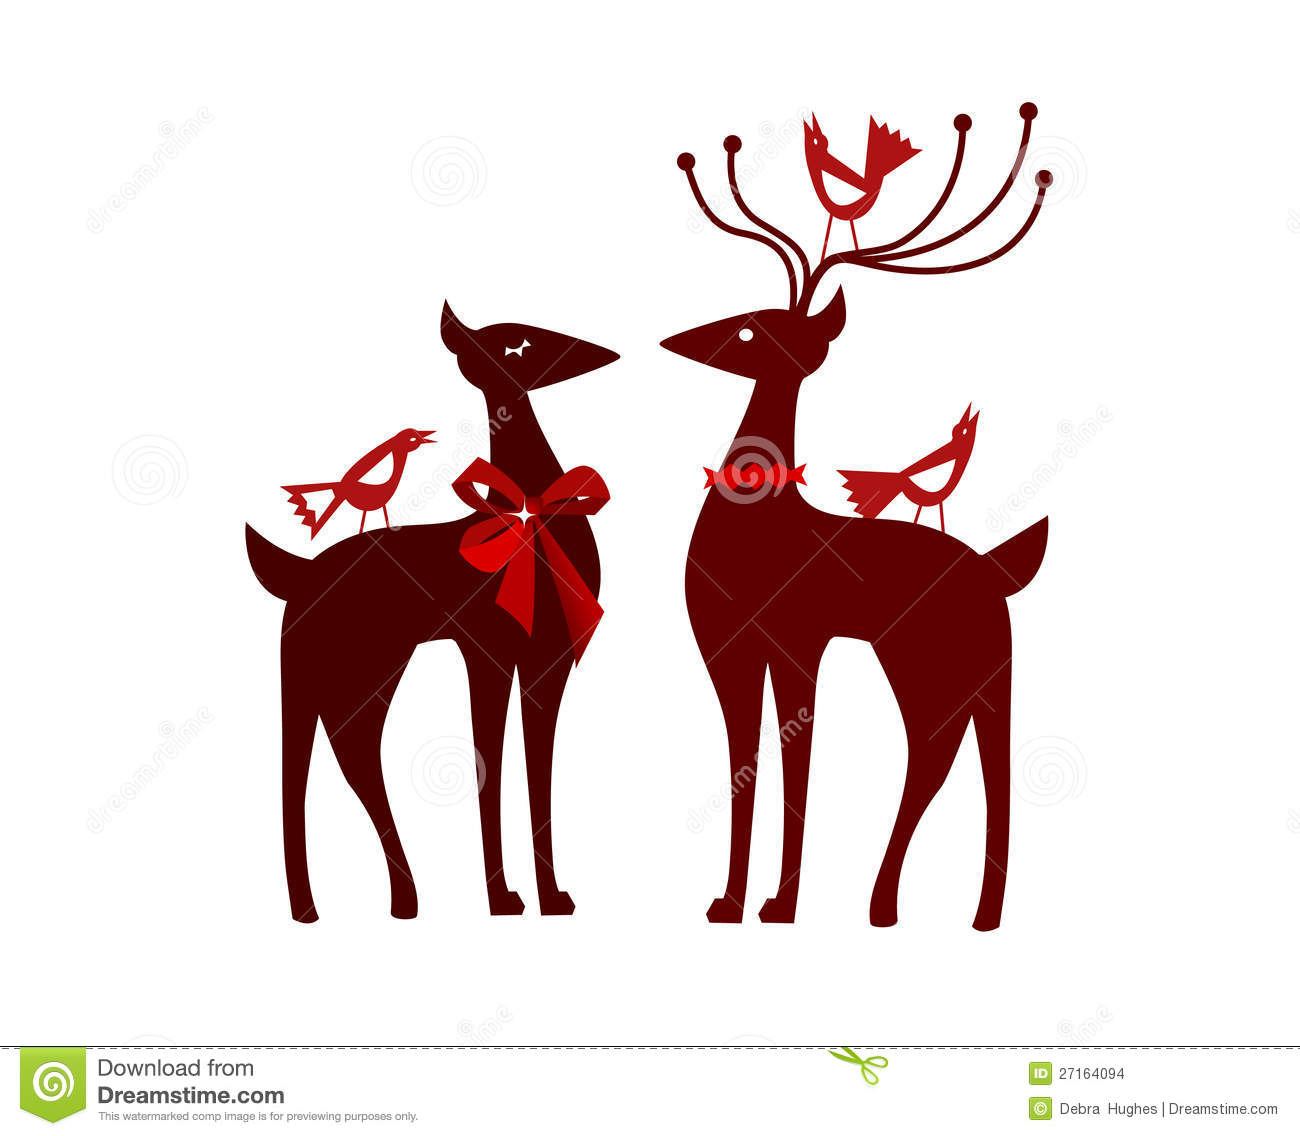 Christmas Reindeer With Nordic Birds Stock Images   Image  27164094